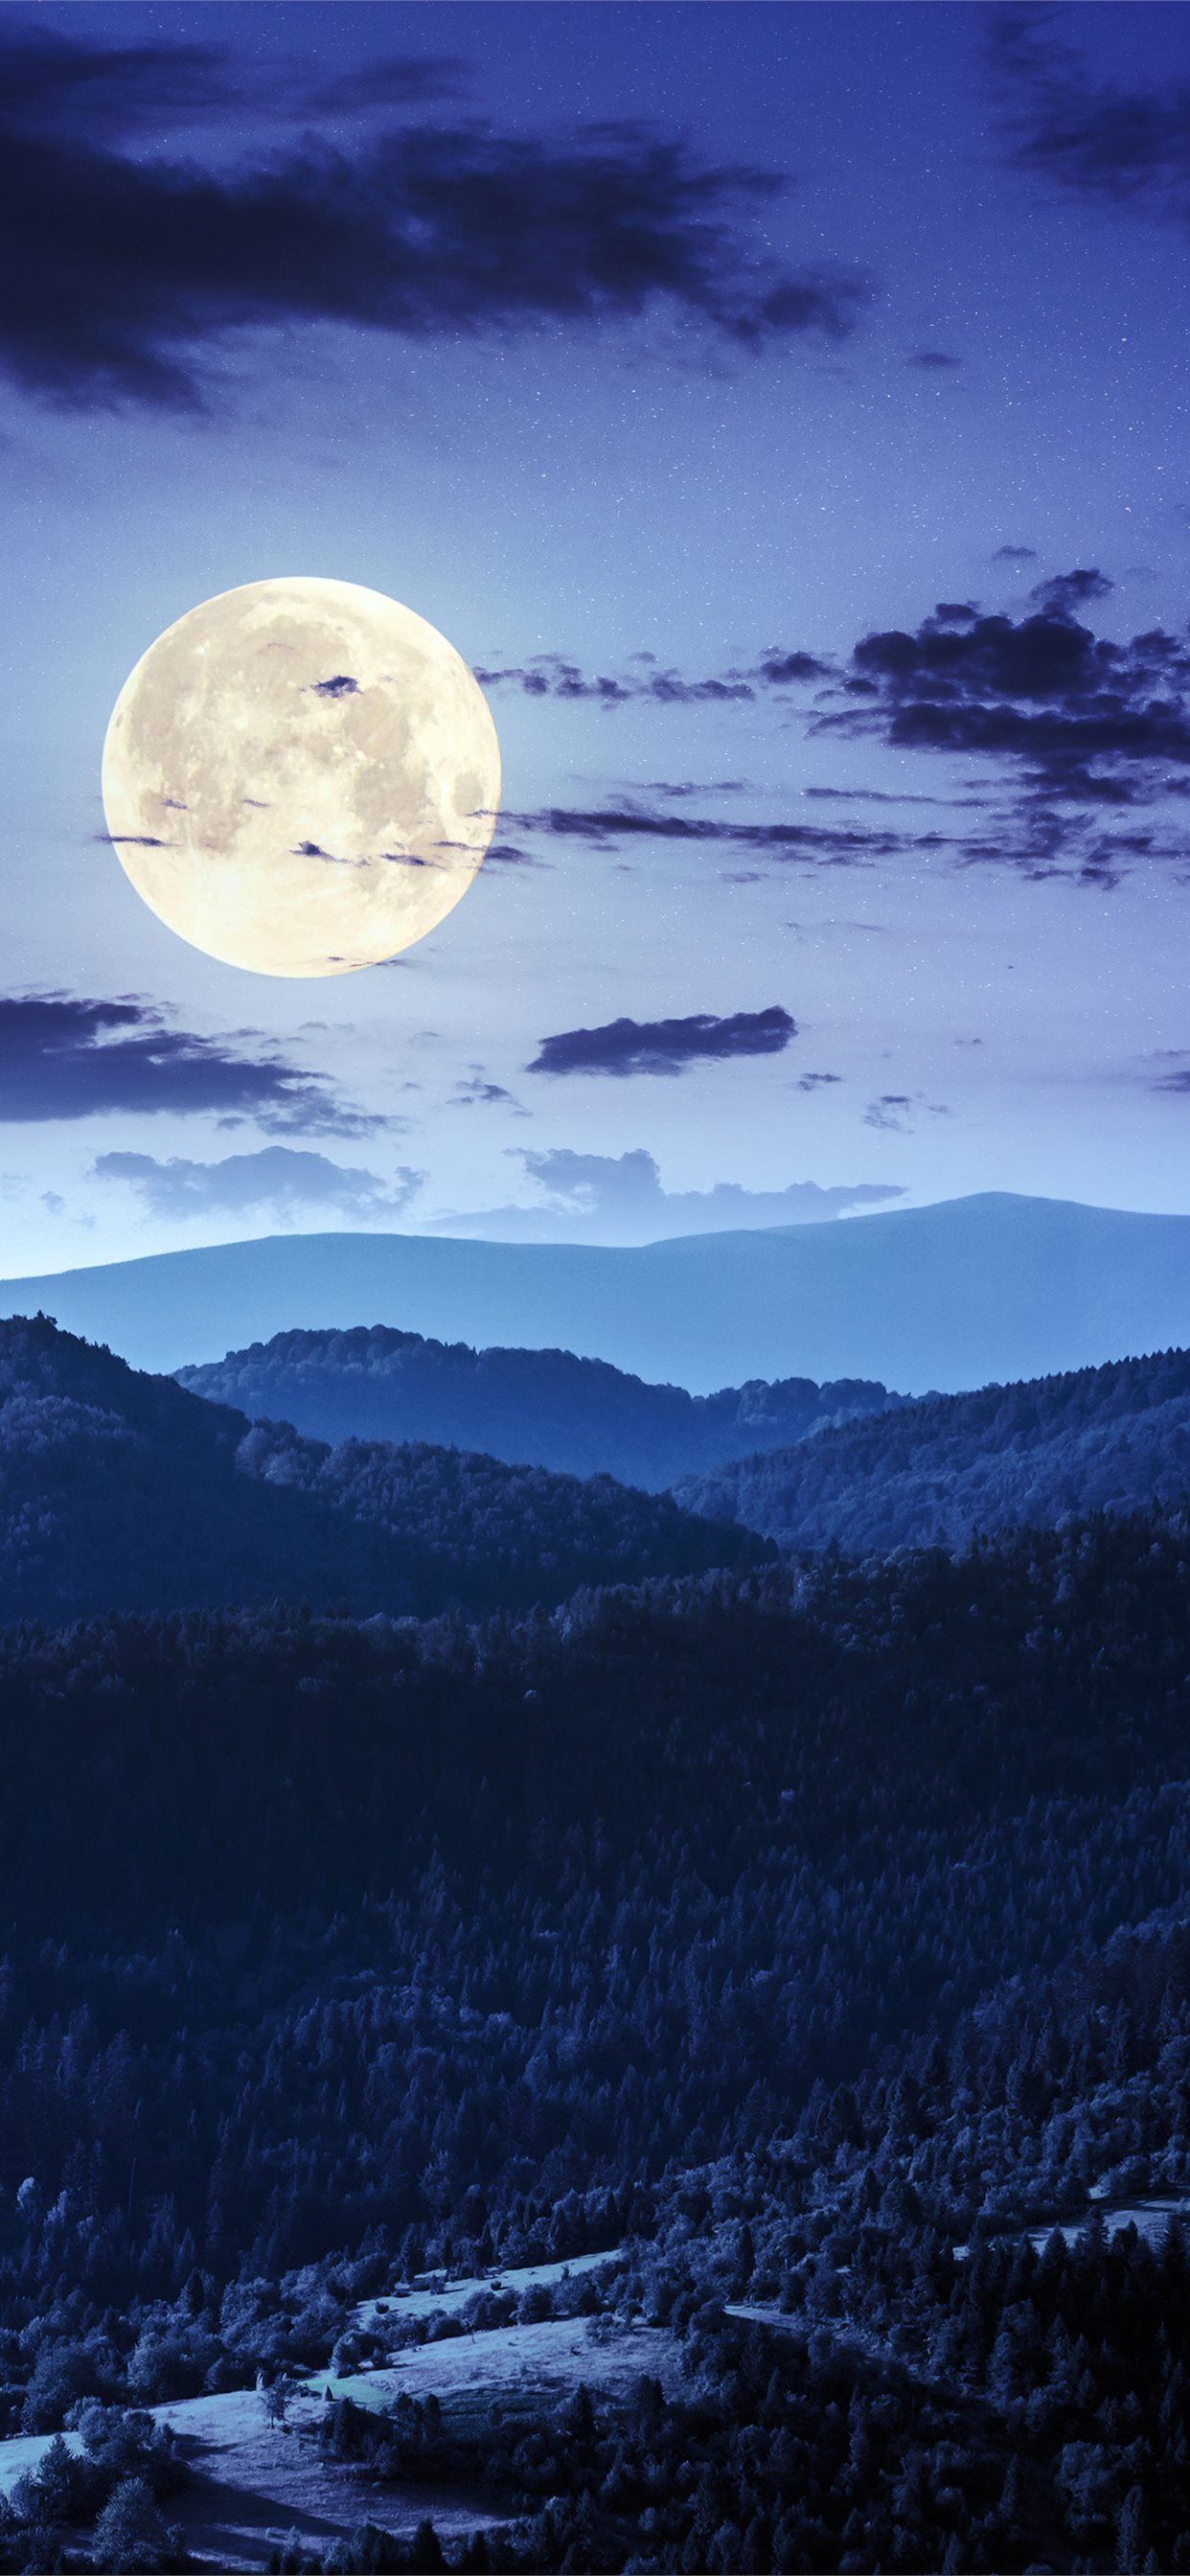 forest night moon clouds 4k iPhone X Wallpaper Free Download